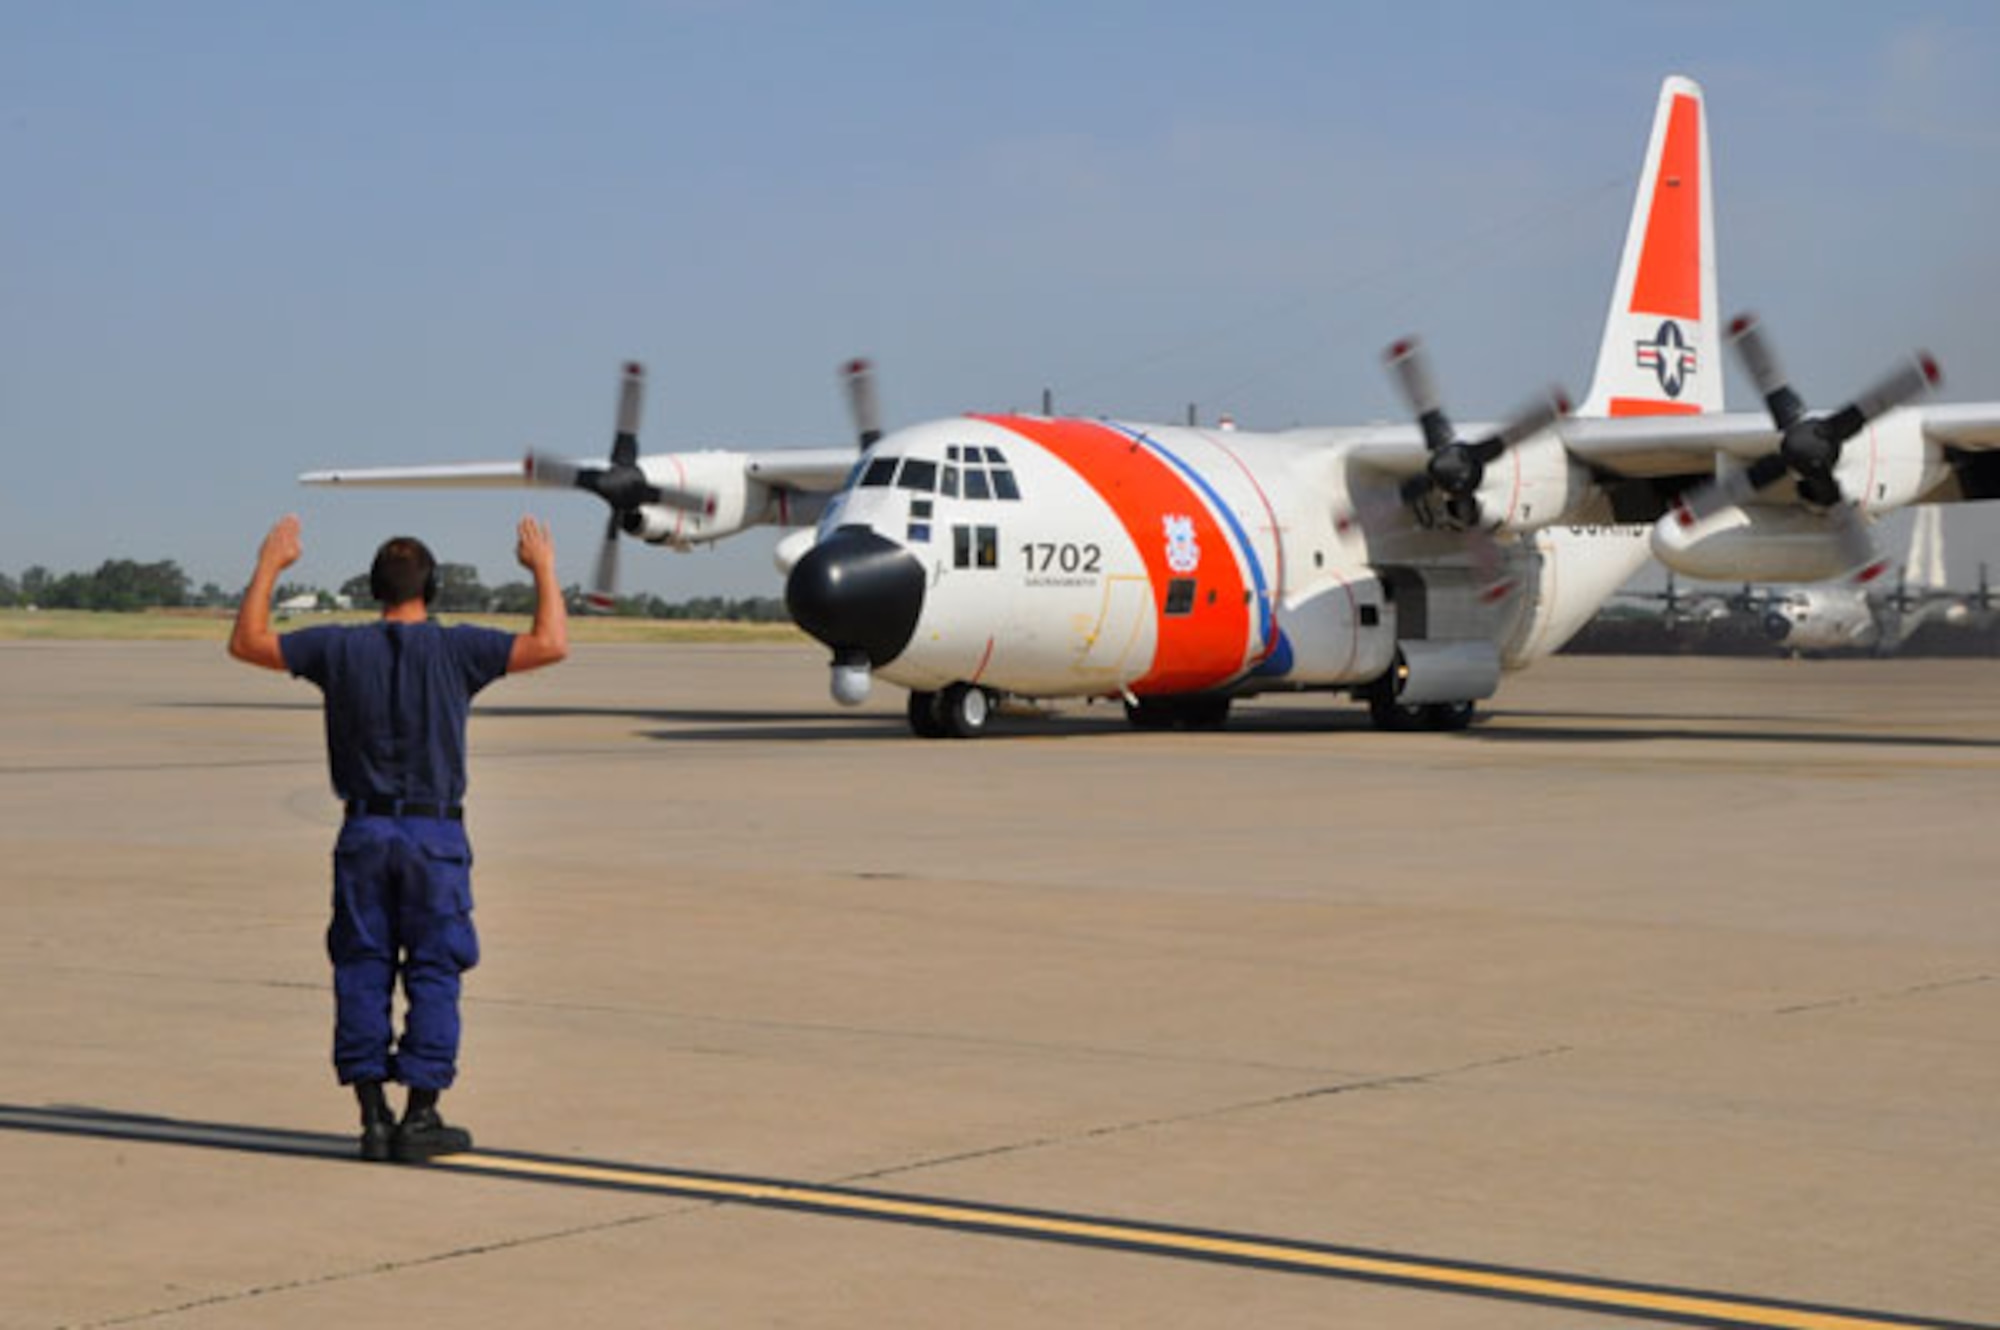 The remaining military aviation unit at the Former McClellan AFB is home to the Coast Guard Air Station Sacramento which operates four HC-130 Hercules fixed-wing aircraft with 189 personnel assigned to the unit.